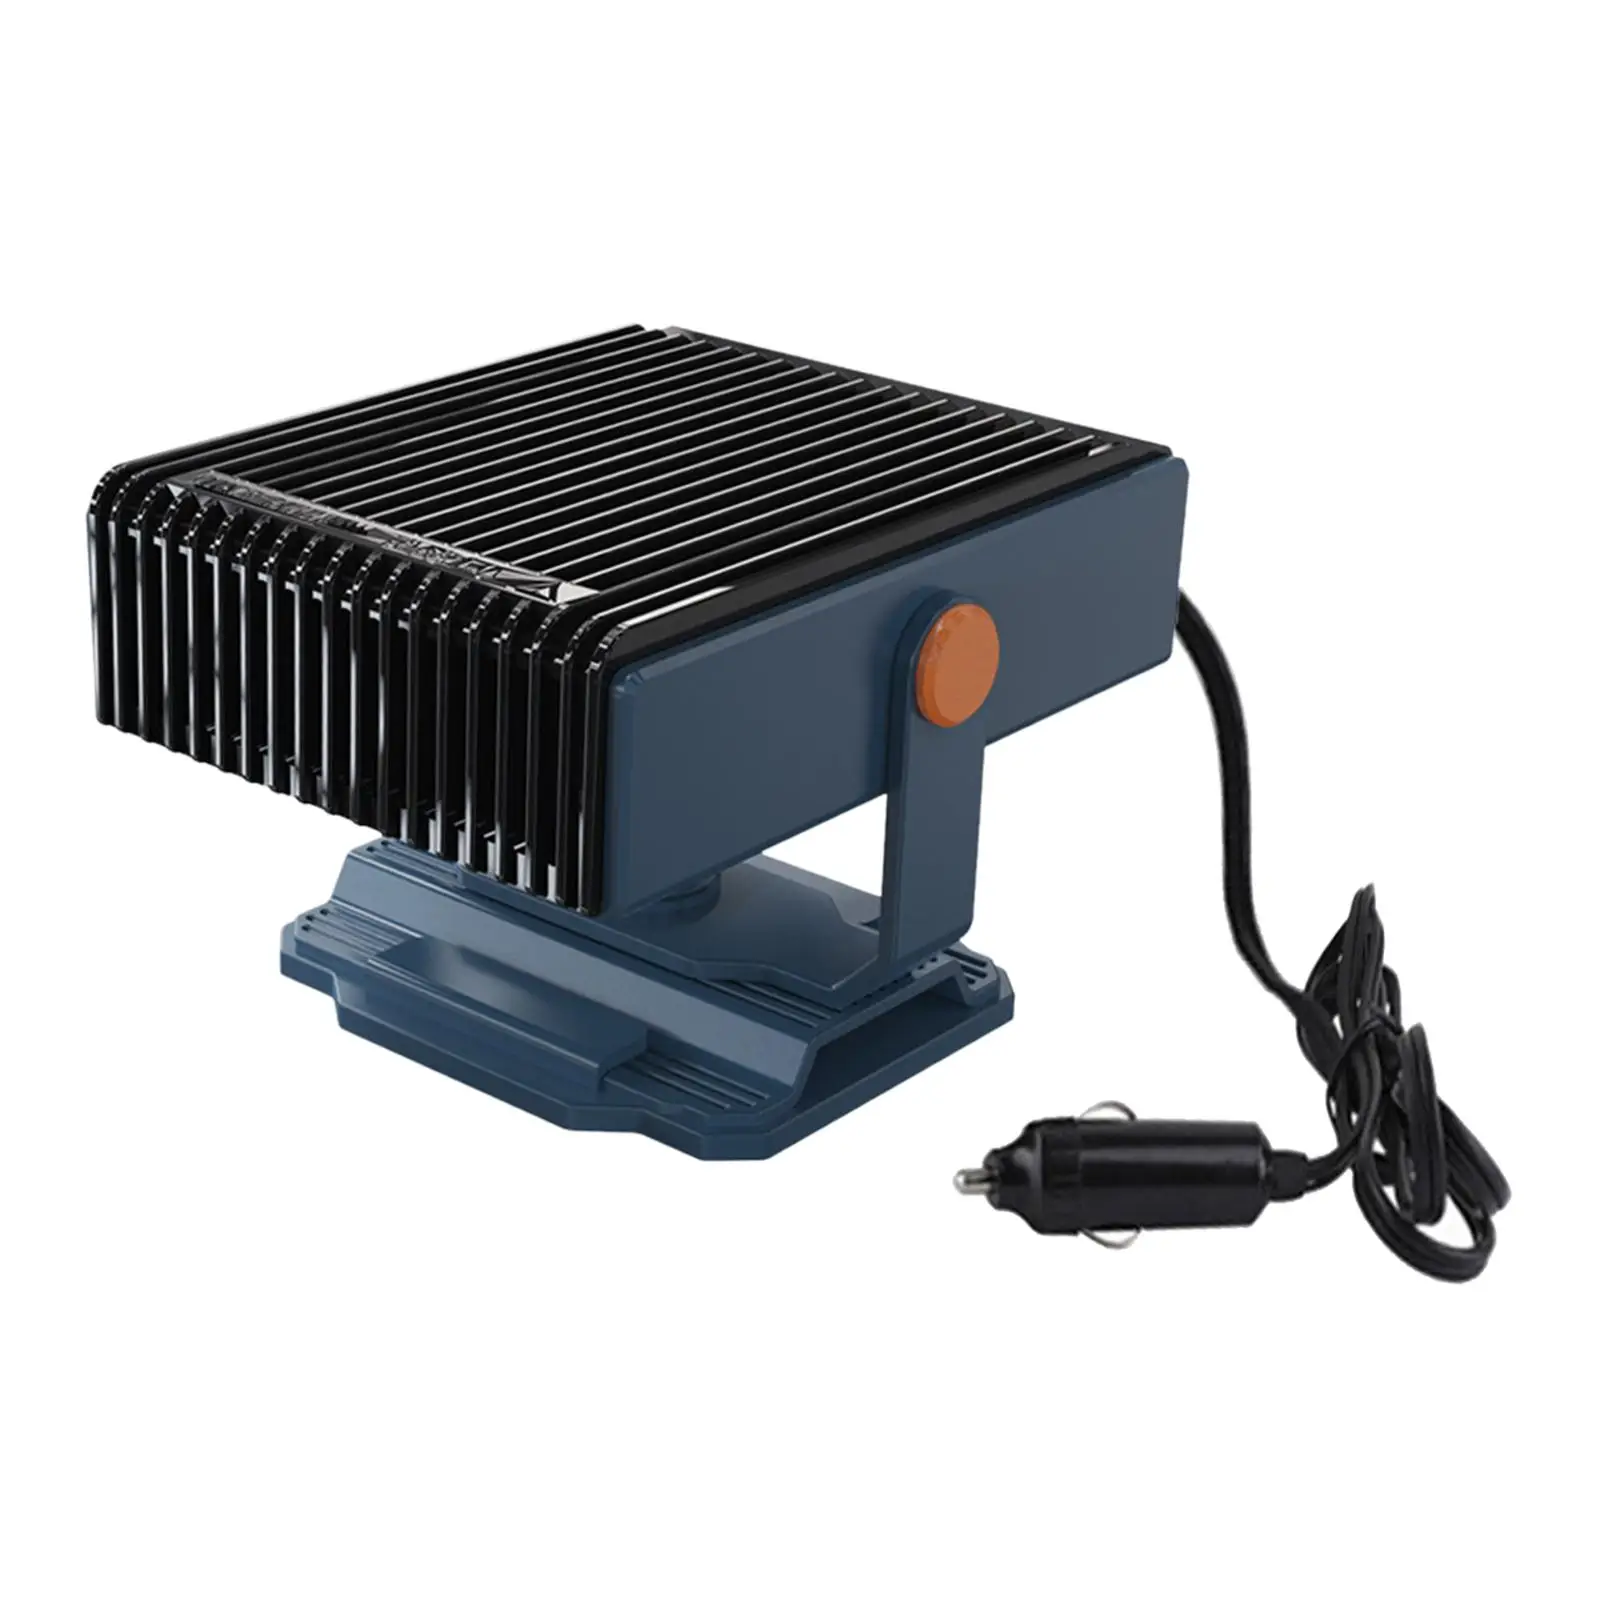 12V Car Heater Protable 360 Rotatable Auto Heating Fan Windshield Defroster Fog Removing for Car Vehicles Boat Truck SUV